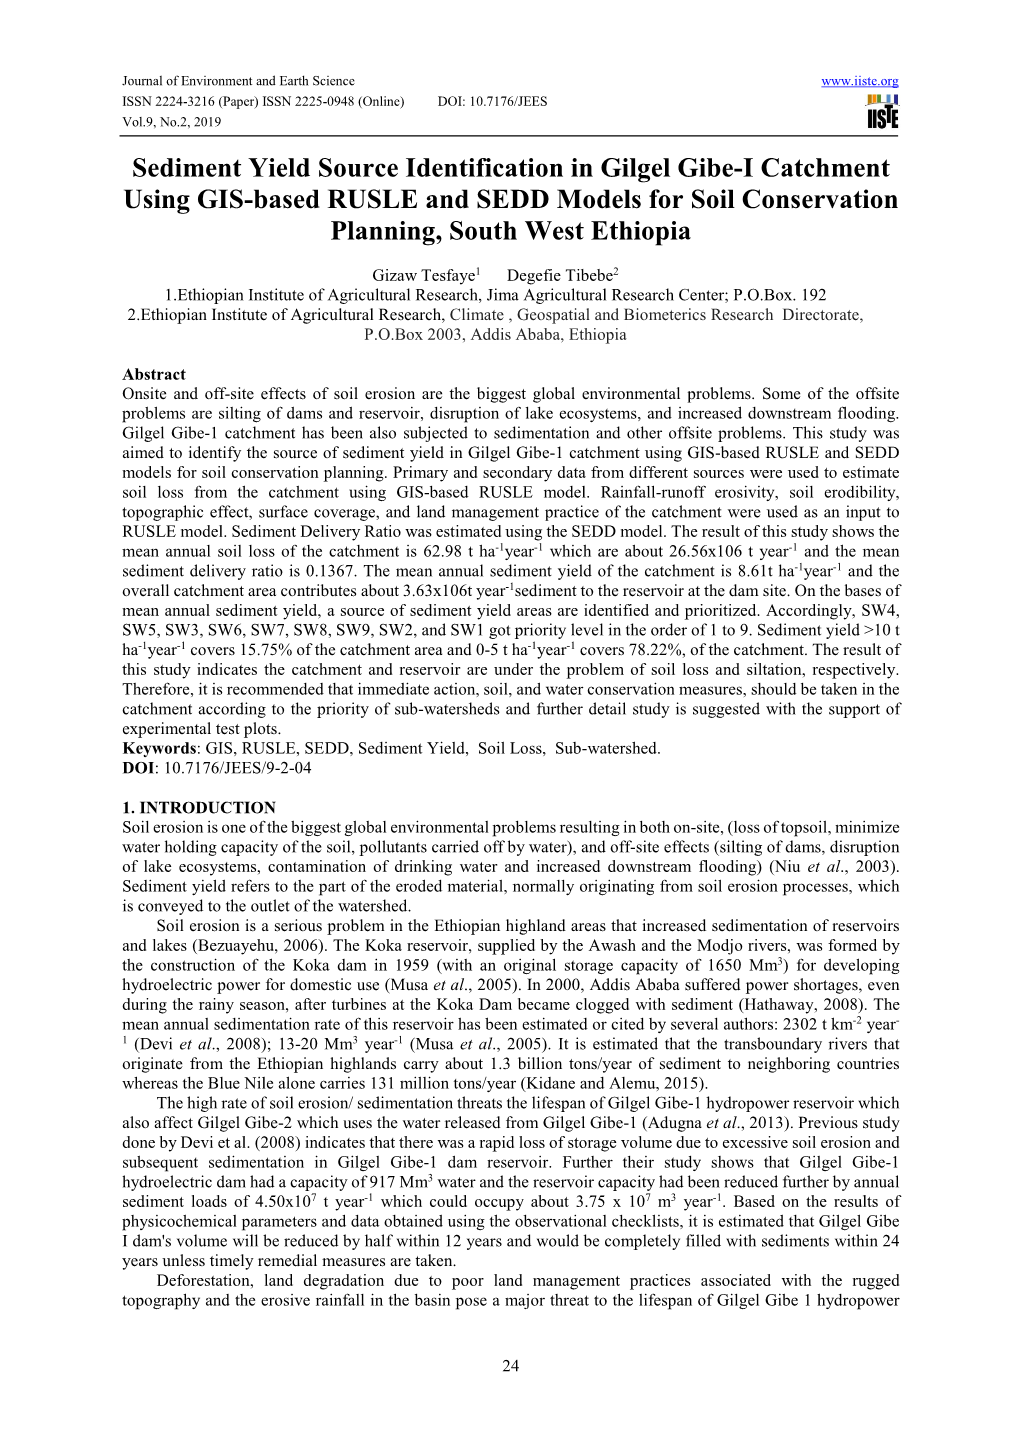 Sediment Yield Source Identification in Gilgel Gibe-I Catchment Using GIS-Based RUSLE and SEDD Models for Soil Conservation Planning, South West Ethiopia